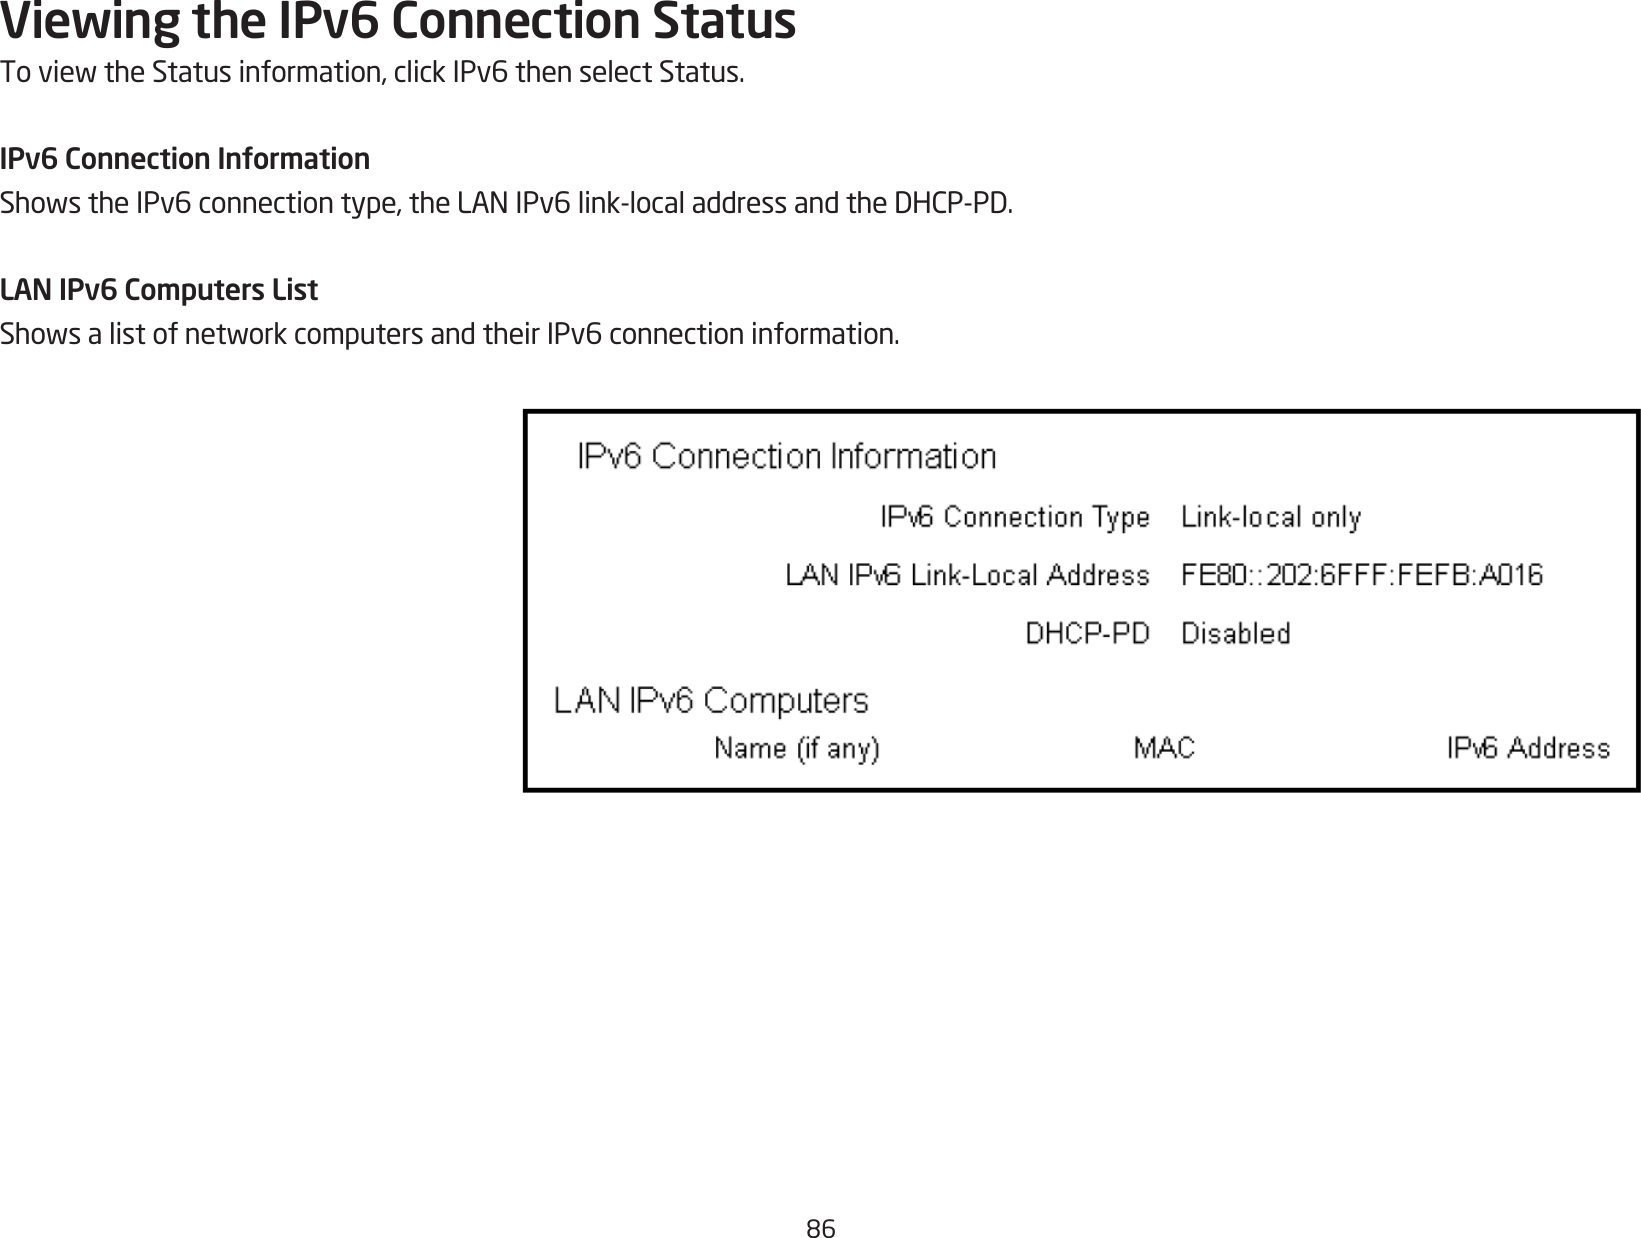 86Viewing the IPv6 Connection StatusToviewtheStatusinformation,clickIPv6thenselectStatus.IPv6 Connection InformationShowstheIPv6connectiontype,theLANIPv6link-localaddressandtheDHCP-PD.LAN IPv6 Computers ListShowsalistofnetworkcomputersandtheirIPv6connectioninformation.